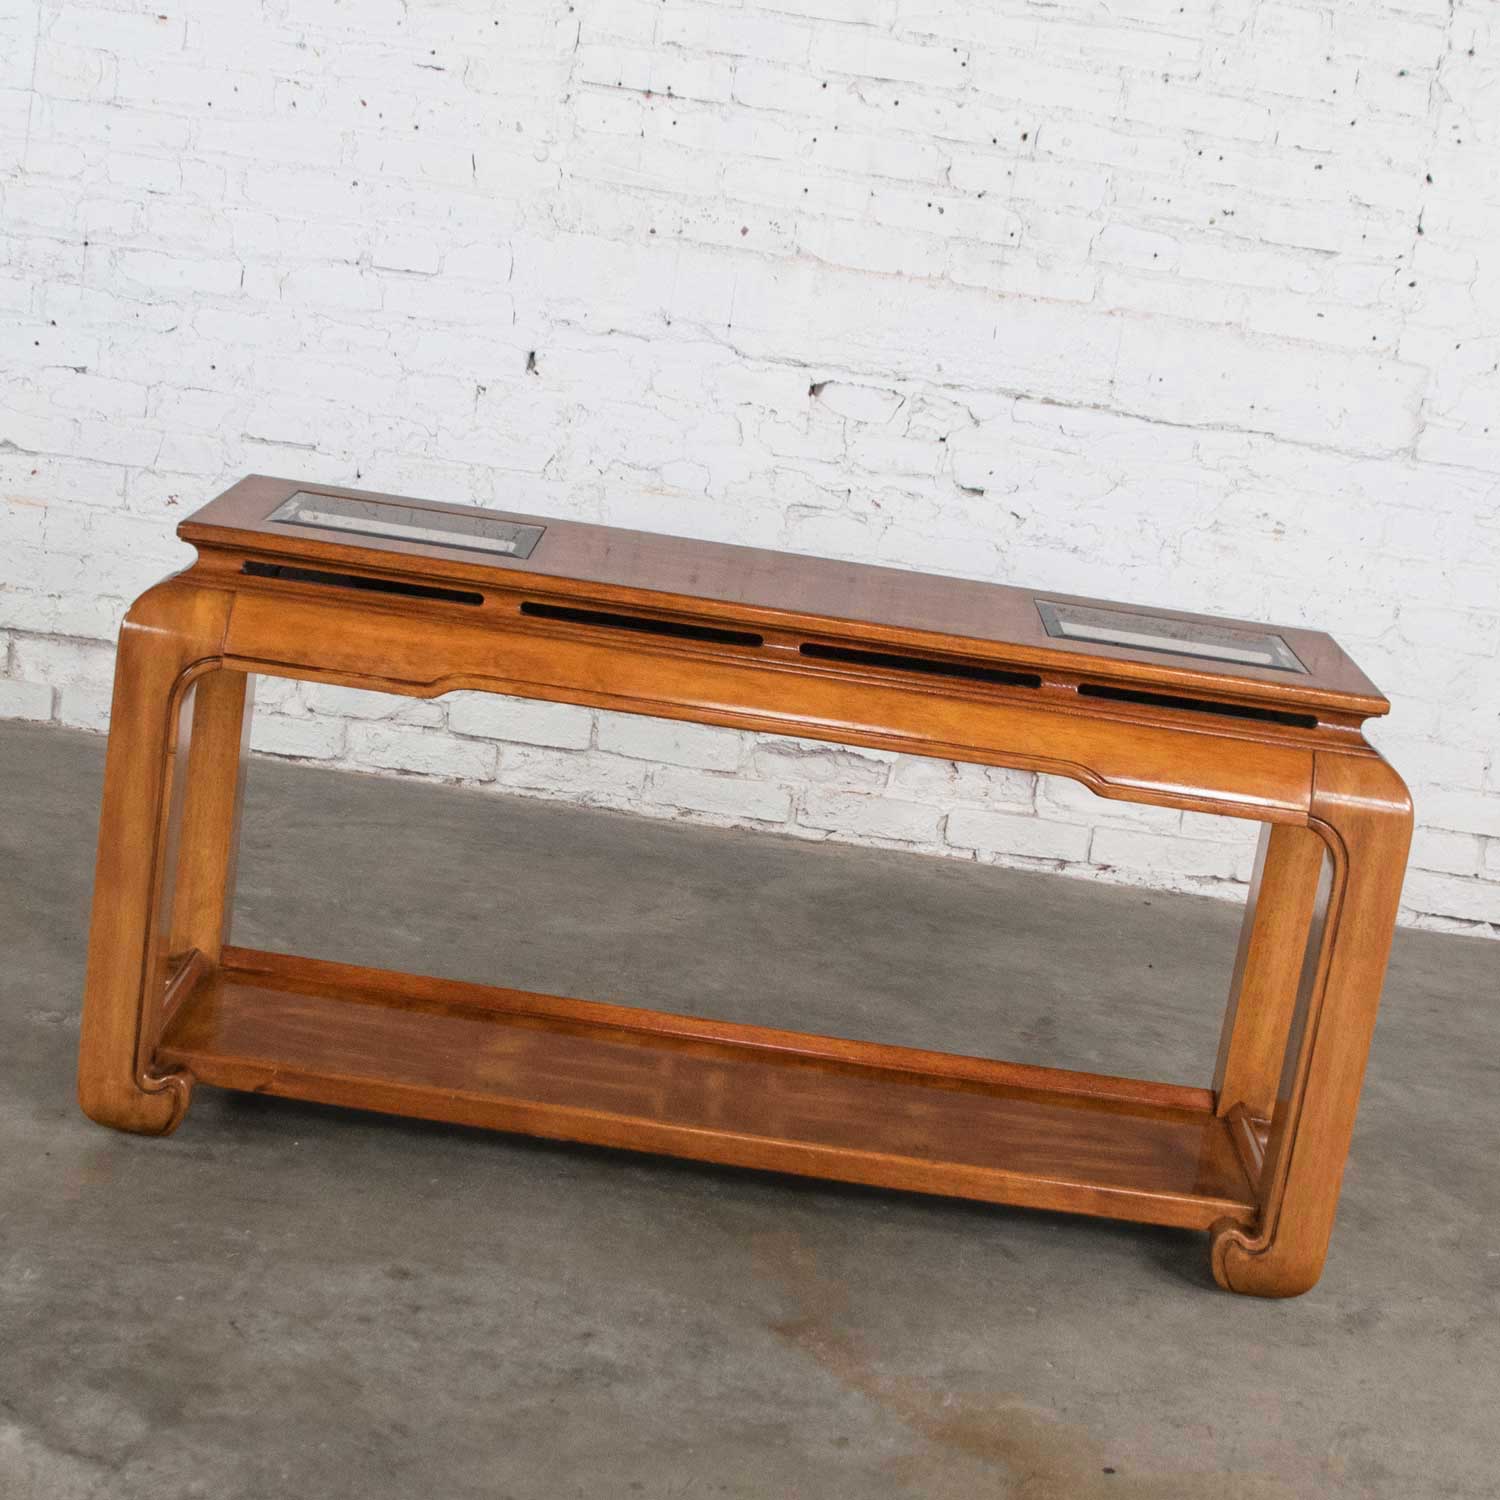 Chinoiserie Chow Leg Ming Style Sofa Console Table Attributed to Schnadig Intl. Furniture